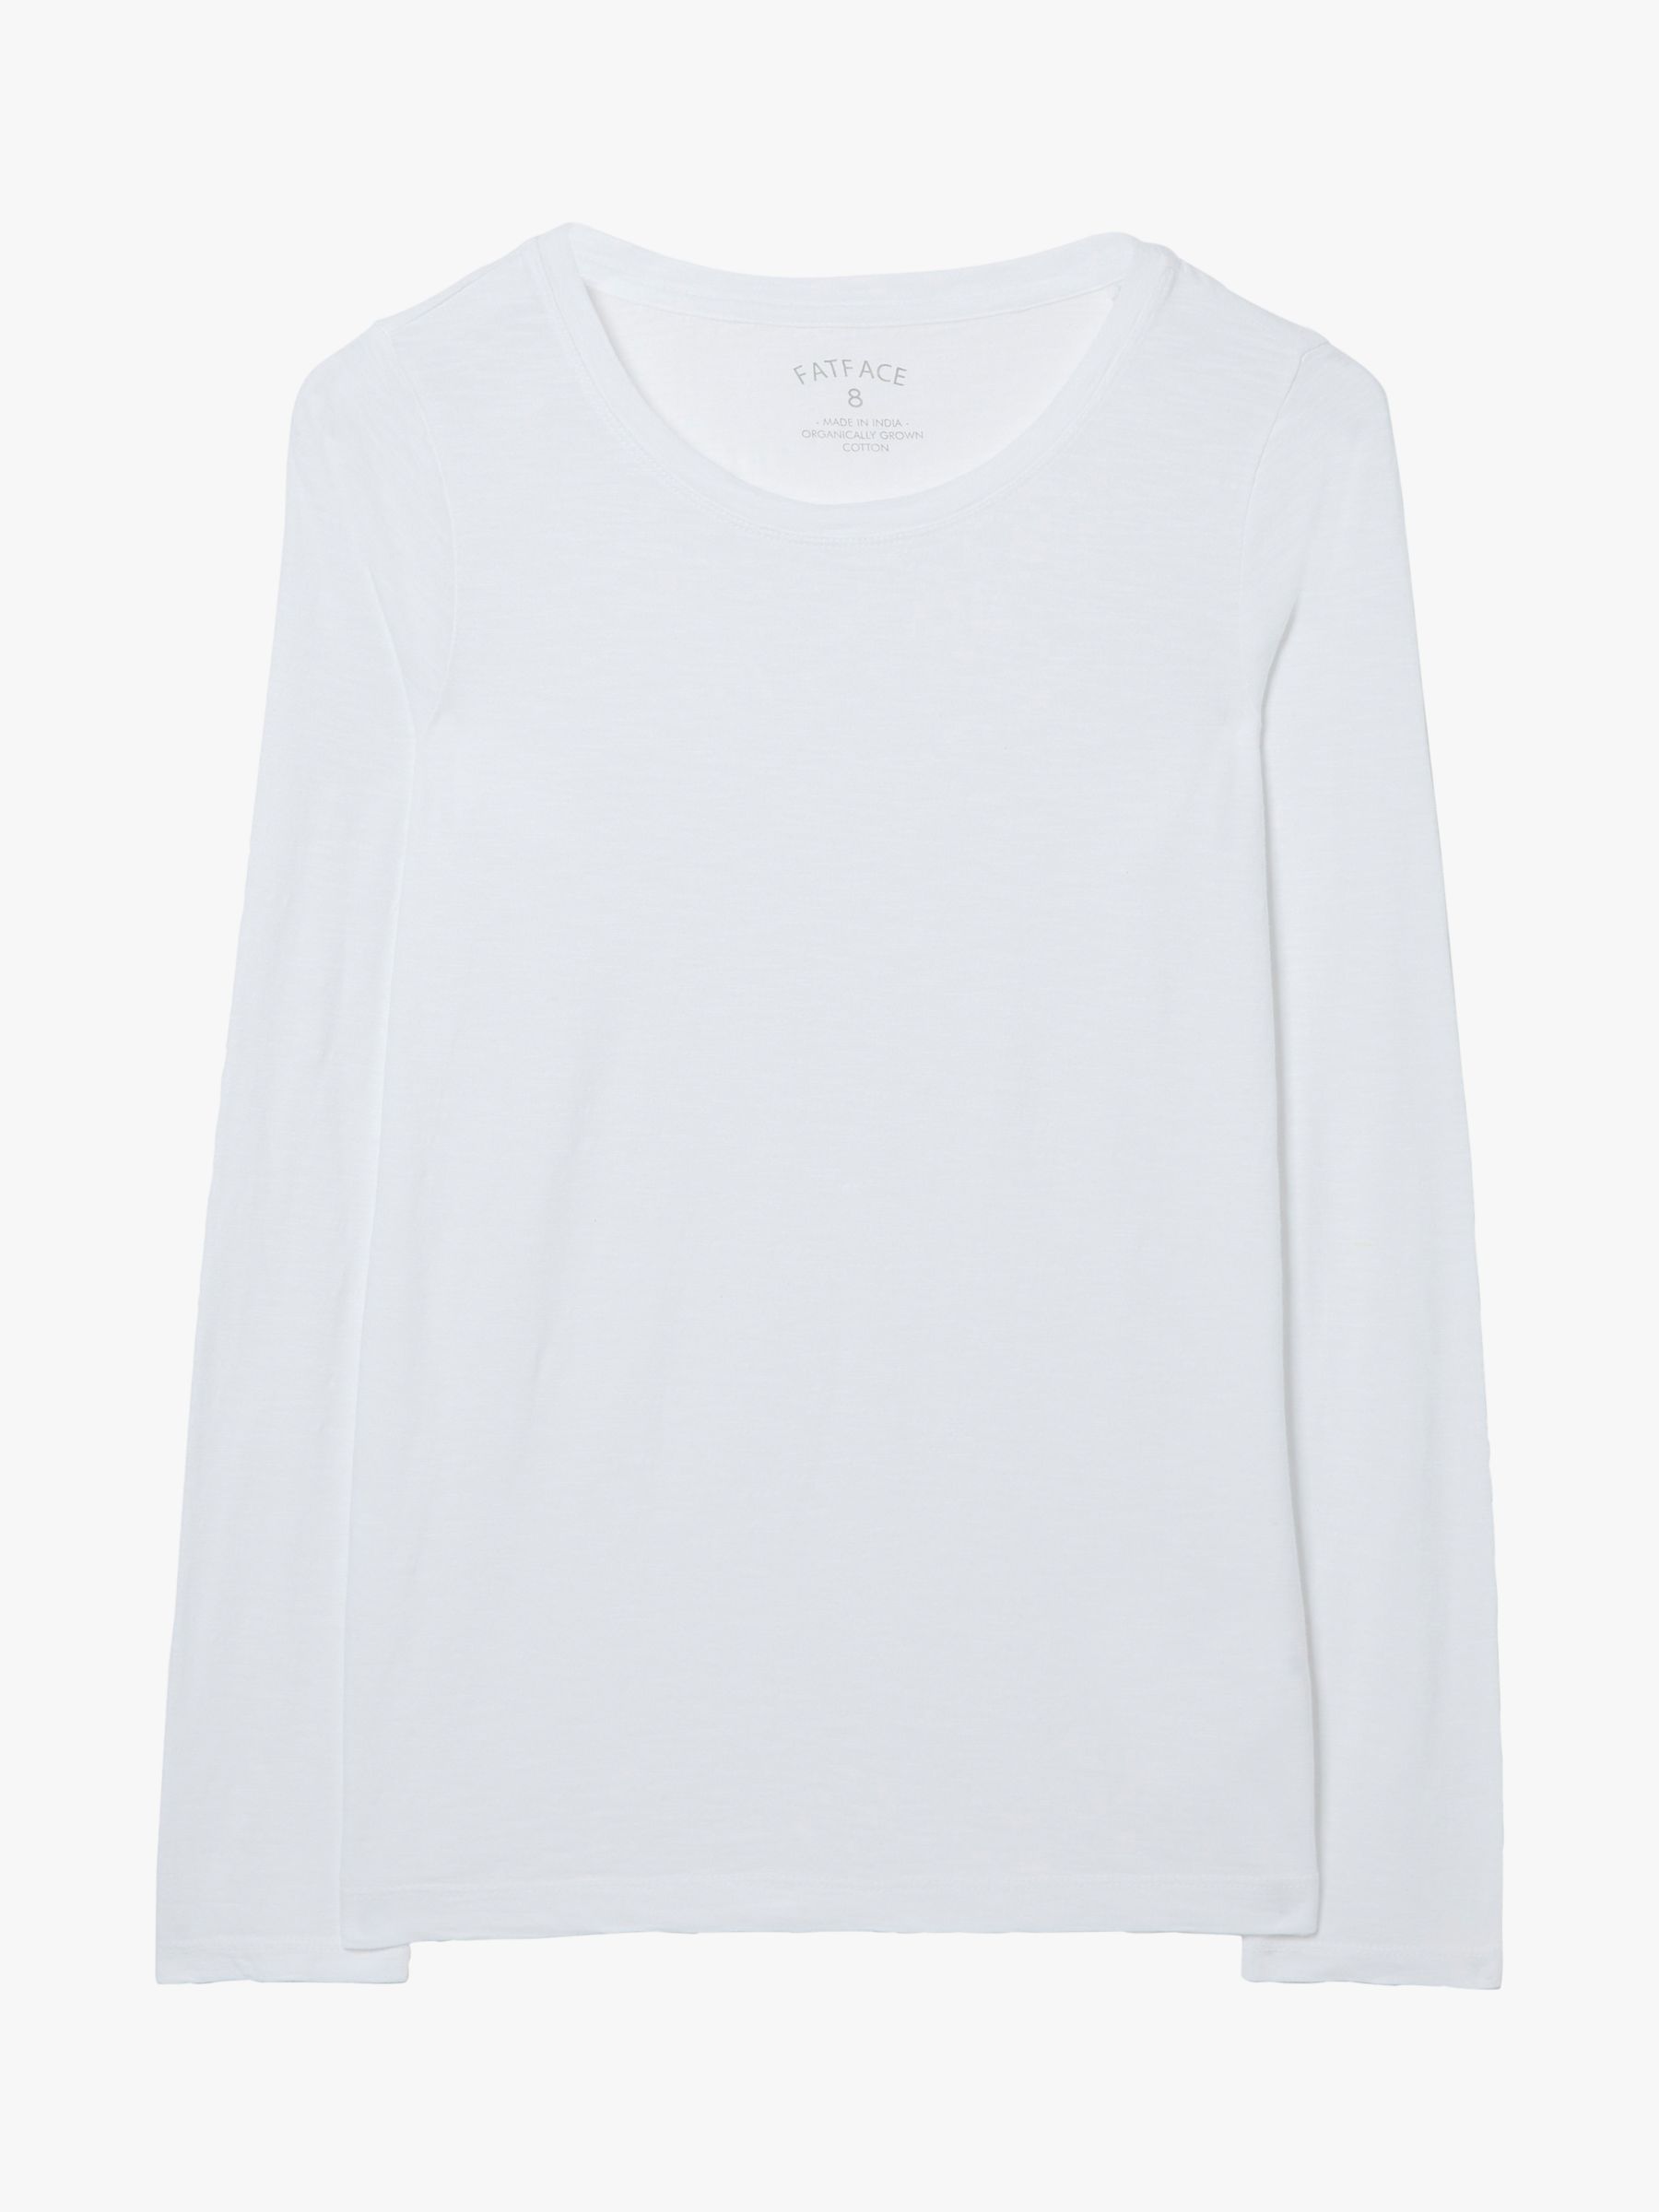 FatFace Katie Long Sleeved T-Shirt, White at John Lewis & Partners